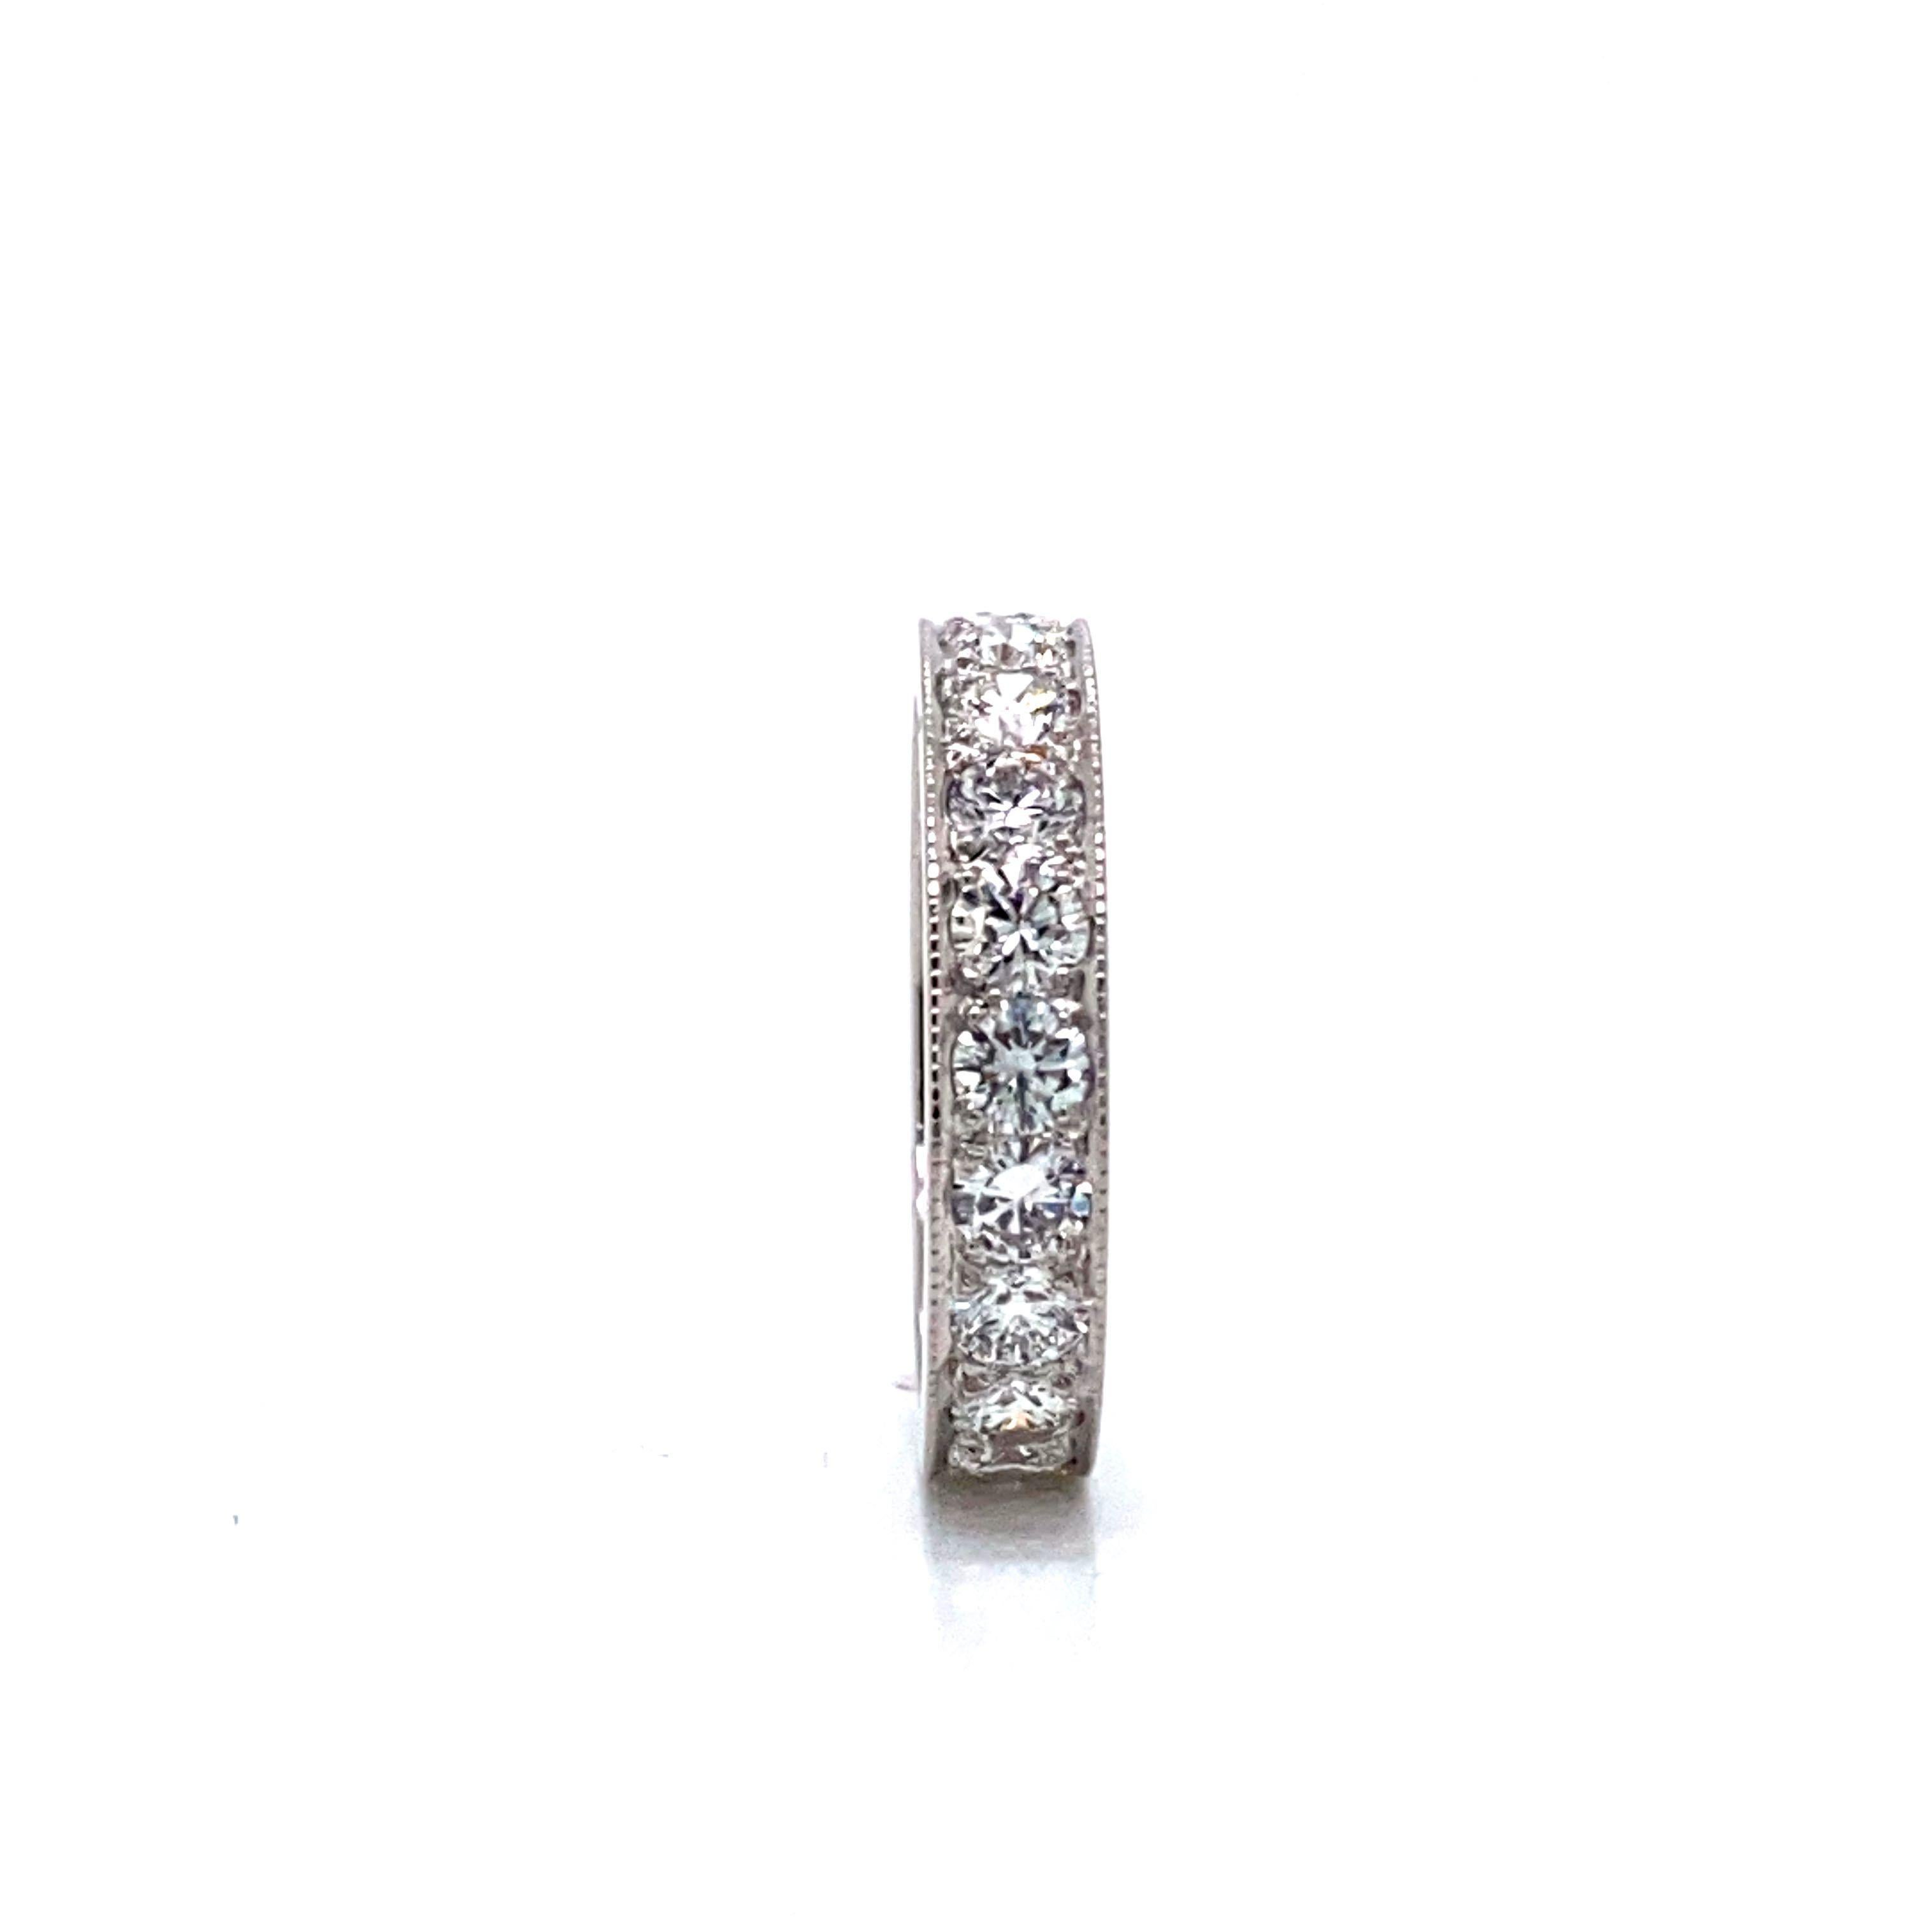 14k White Gold and 2cttw Diamond Eternity Band Ring Size 5.75

Condition:  Excellent Condition, Professionally Cleaned and Polished
Metal:  14k Gold (Marked, and Professionally Tested)
Weight:  5g
Diamonds:  Round Brilliant Diamonds 2cttw (Each